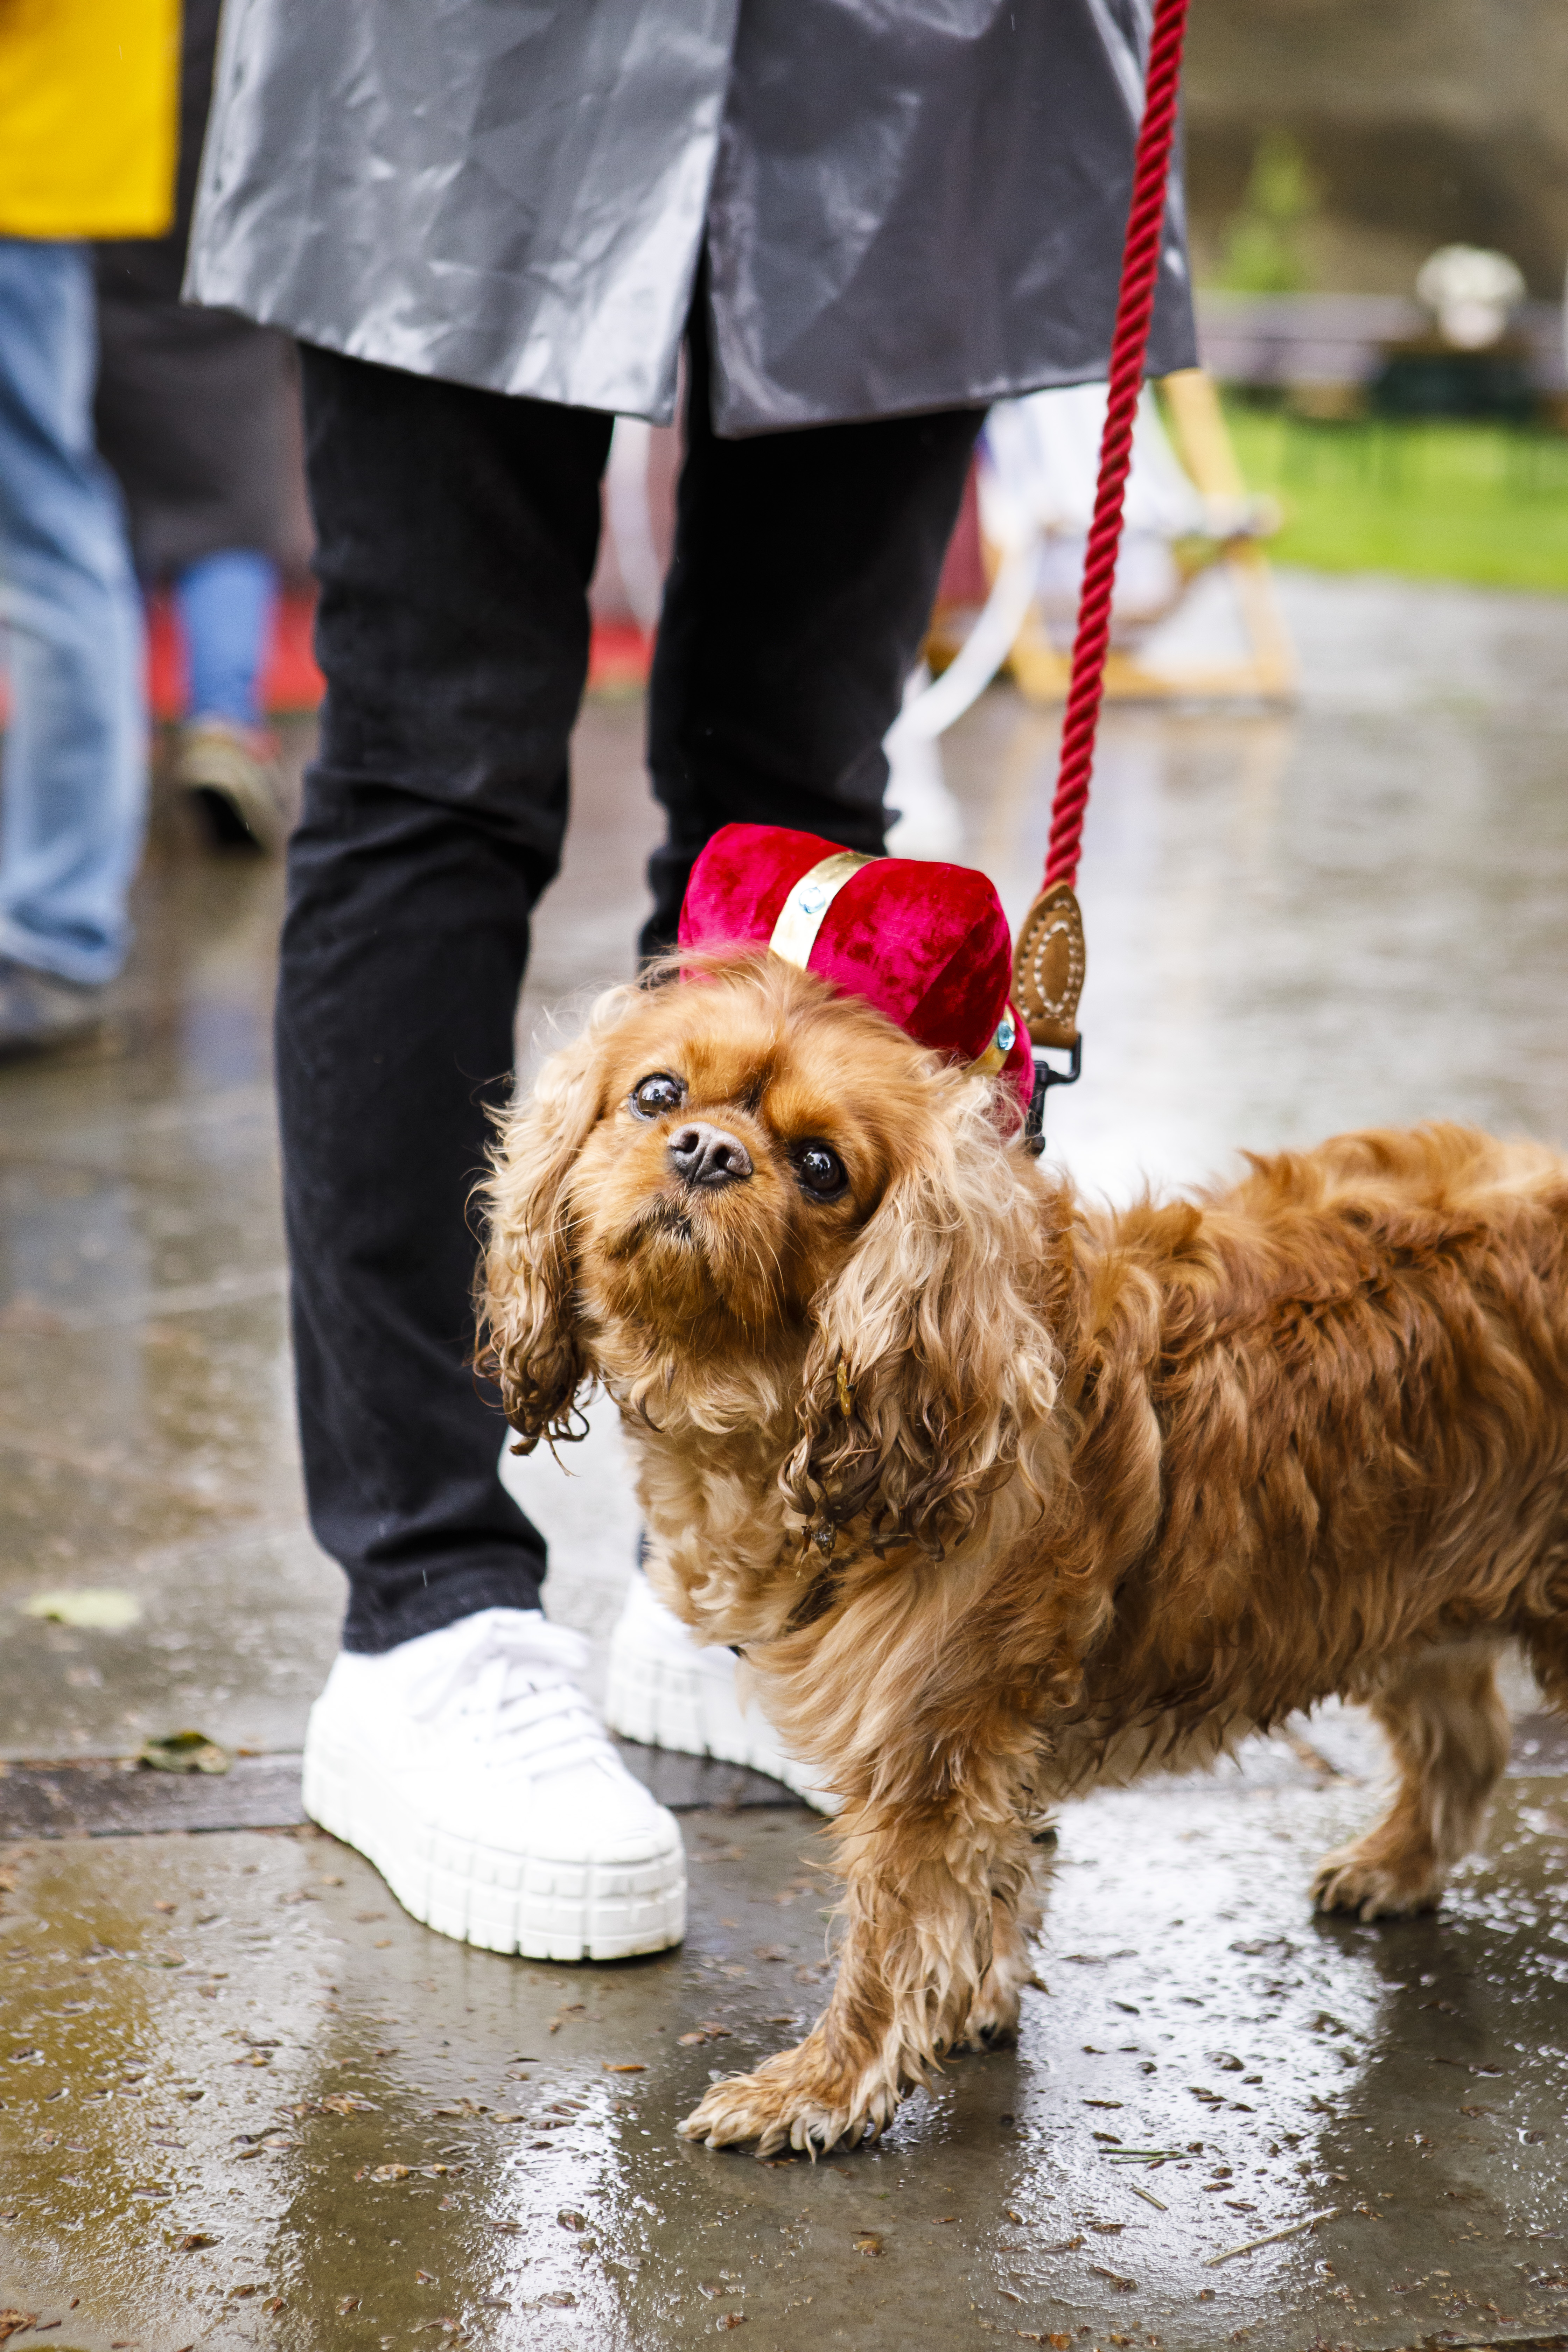 A King Charles spaniels wearing a red head piece during the parade across King's Road, Chelsea, London